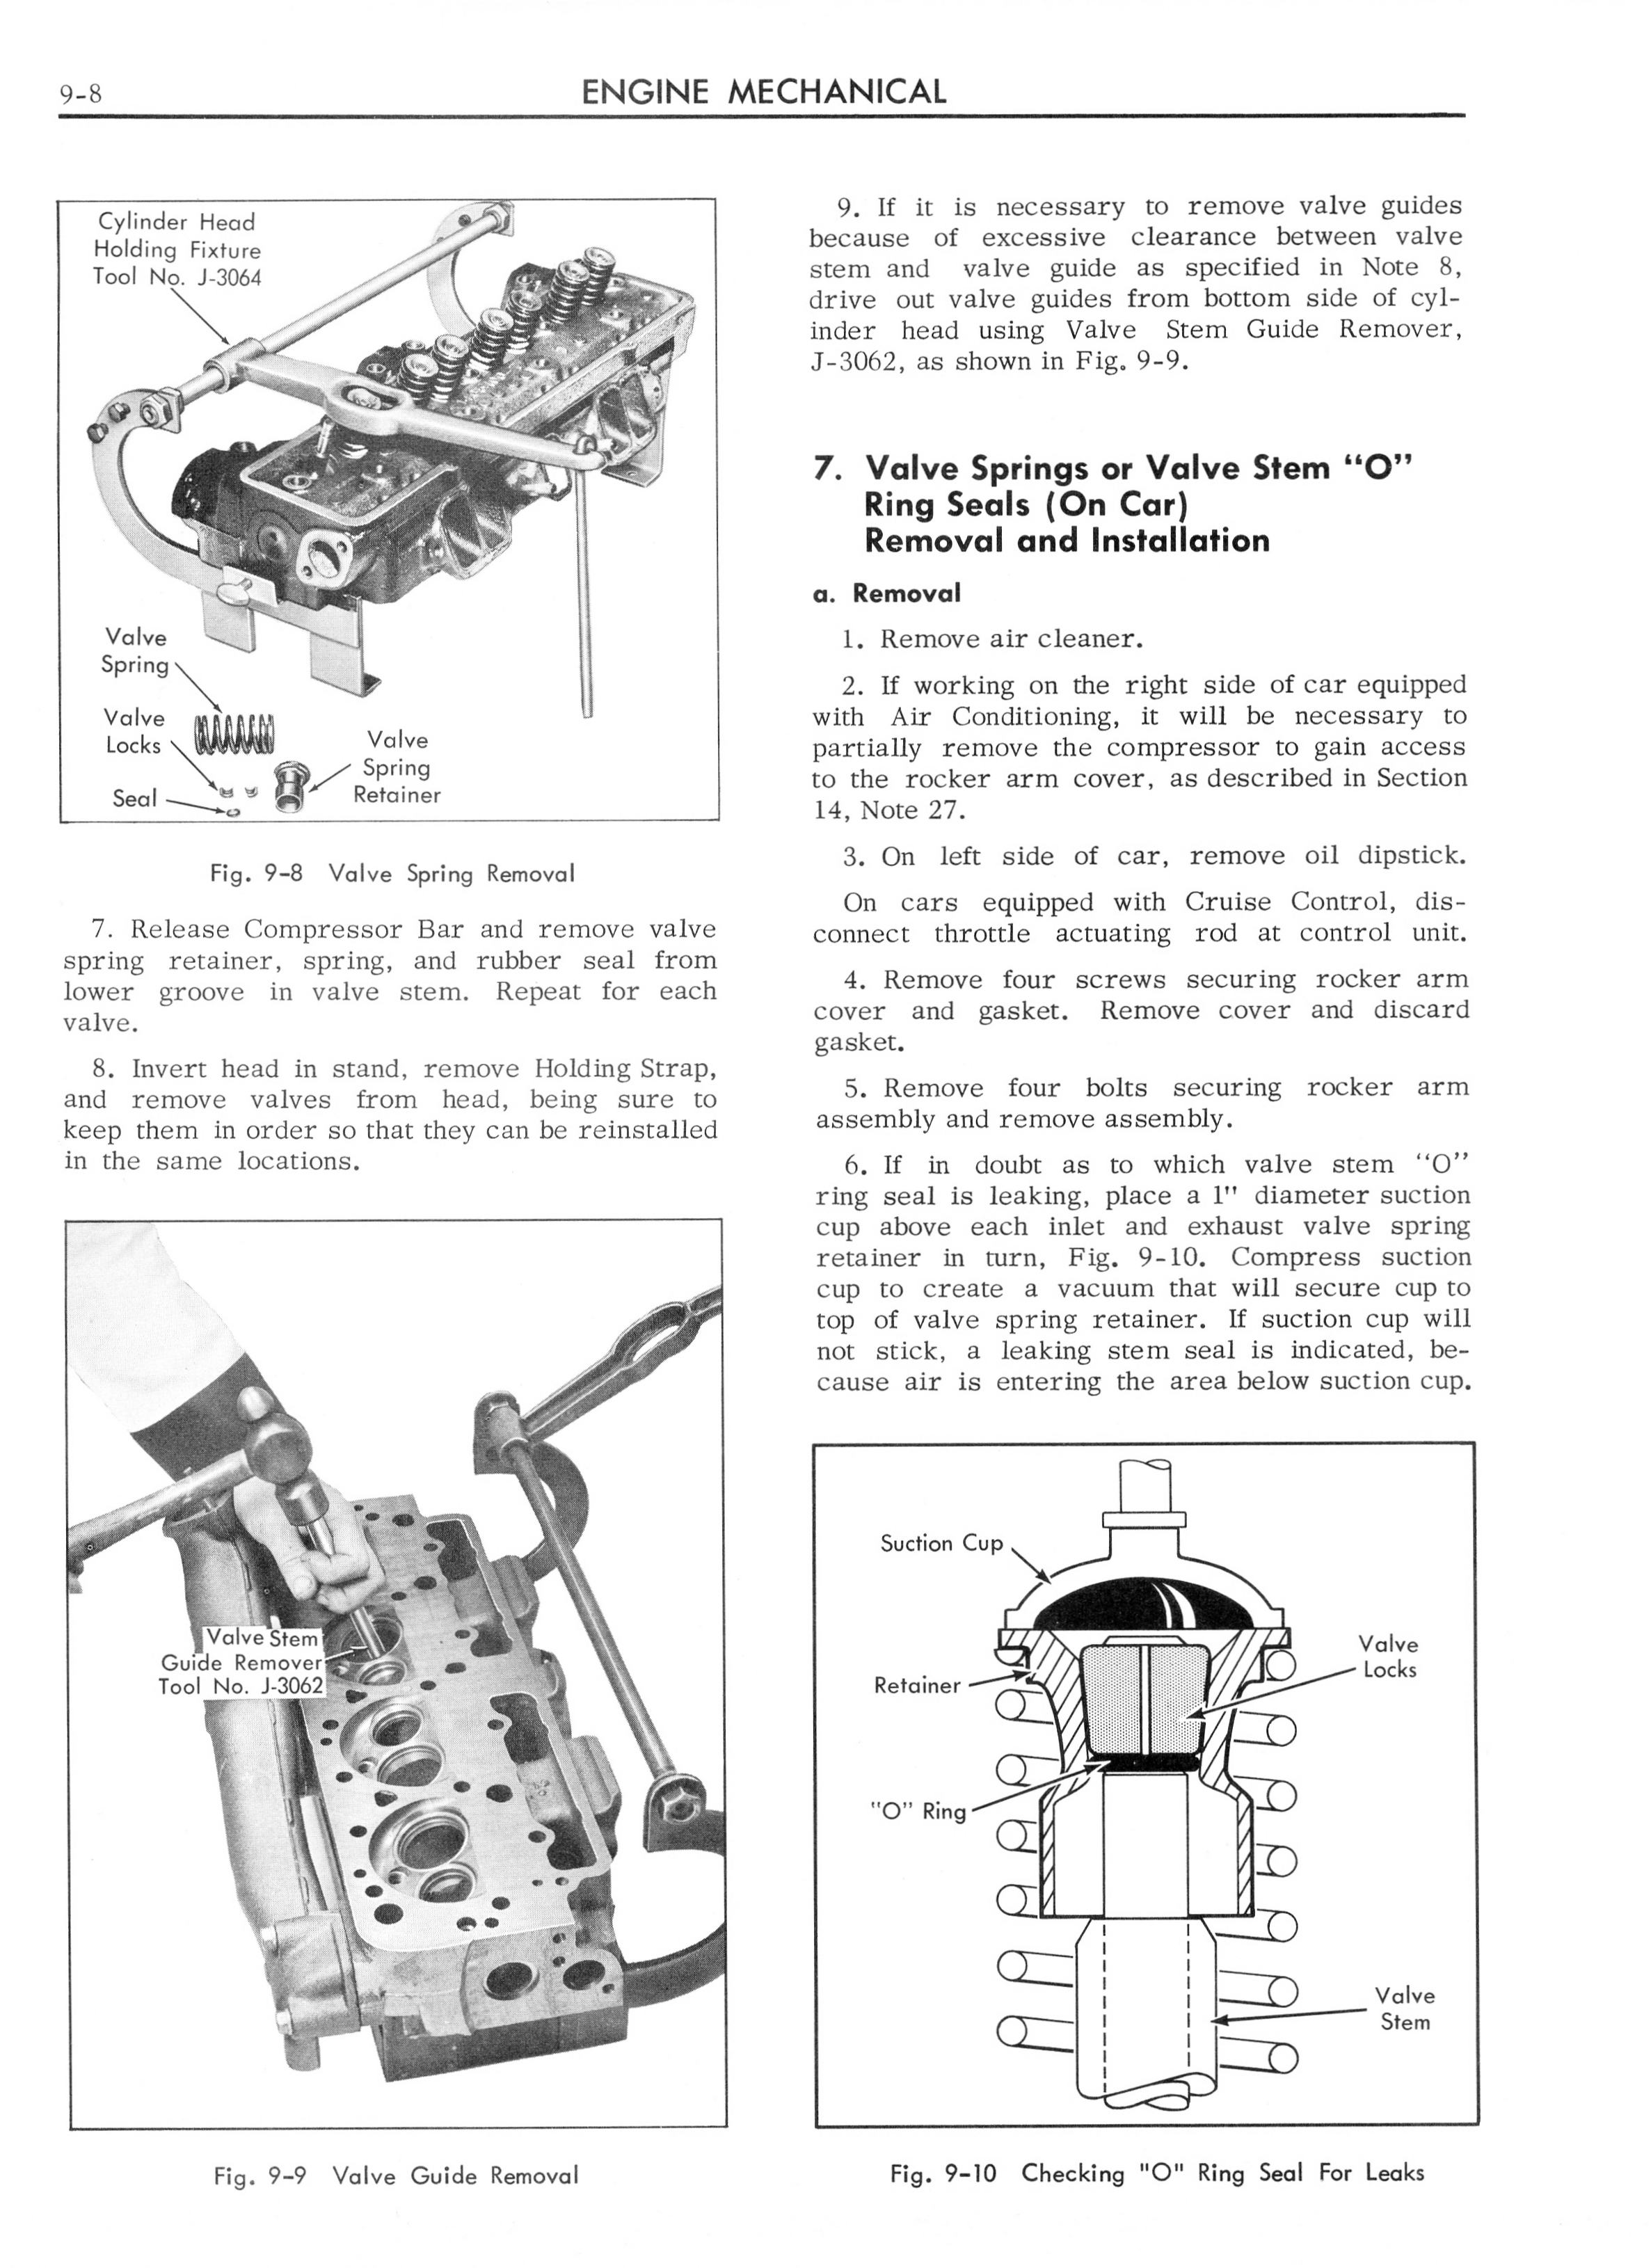 1962 Cadillac Shop Manual - Engine Mechanical Page 8 of 32